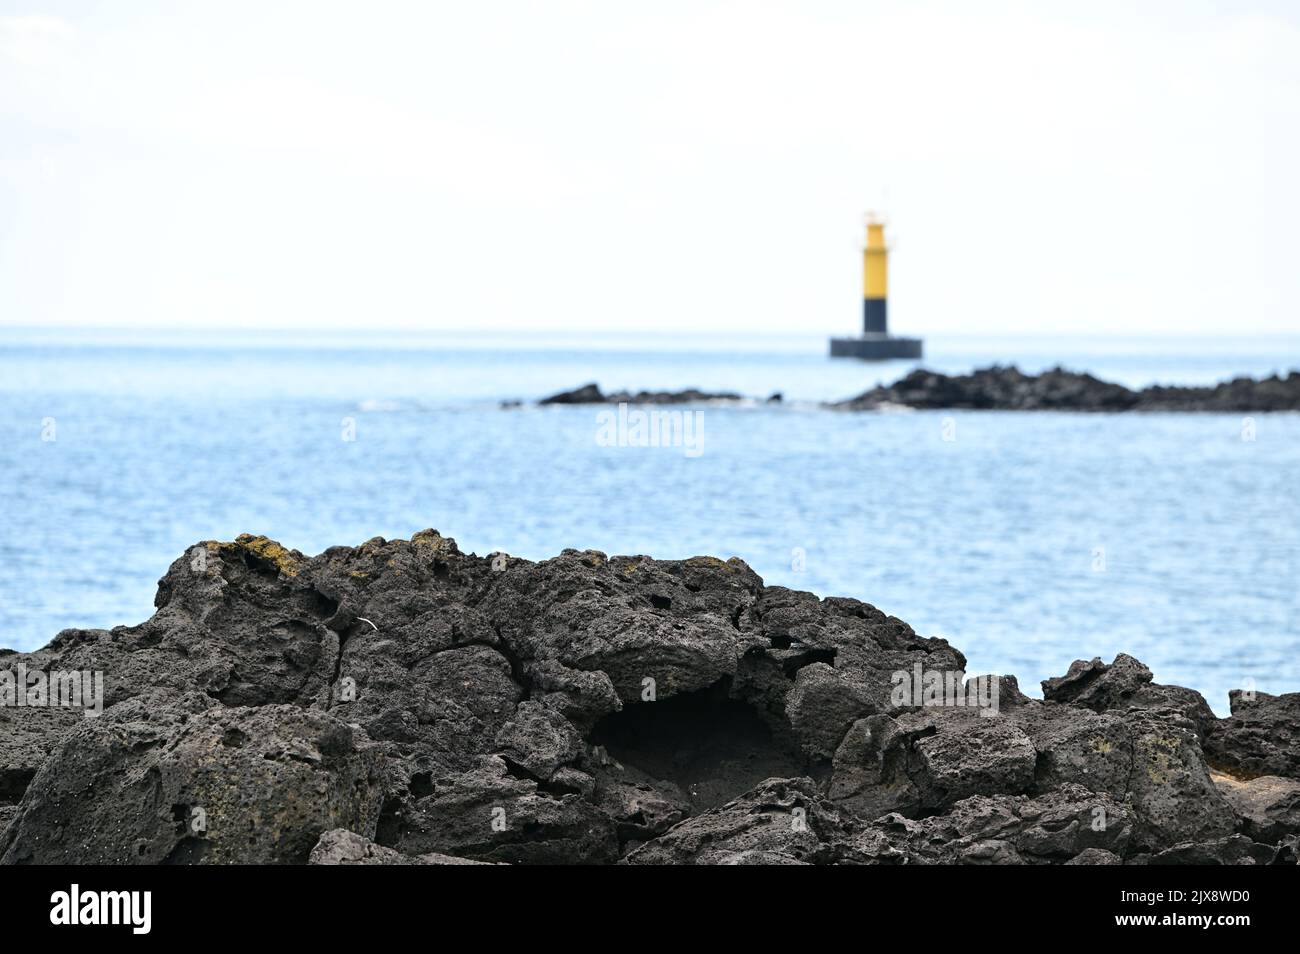 You can see the rocks on the beach and the lighthouse behind them Stock Photo